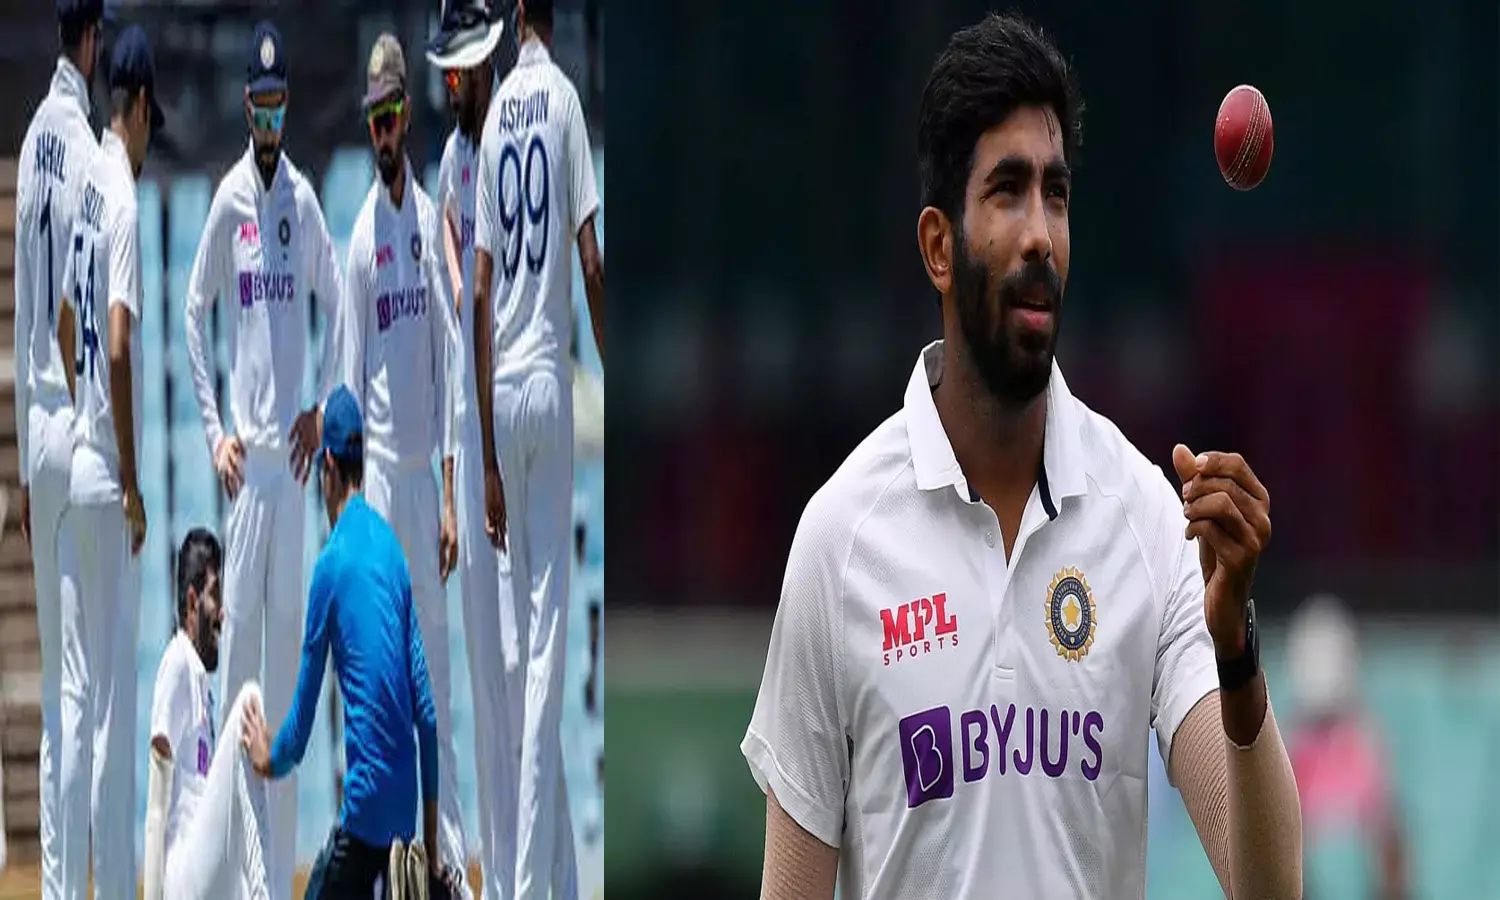 IND vs SA 1st Test: Injury scare for Team India as Jasprit Bumrah suffers right ankle sprain